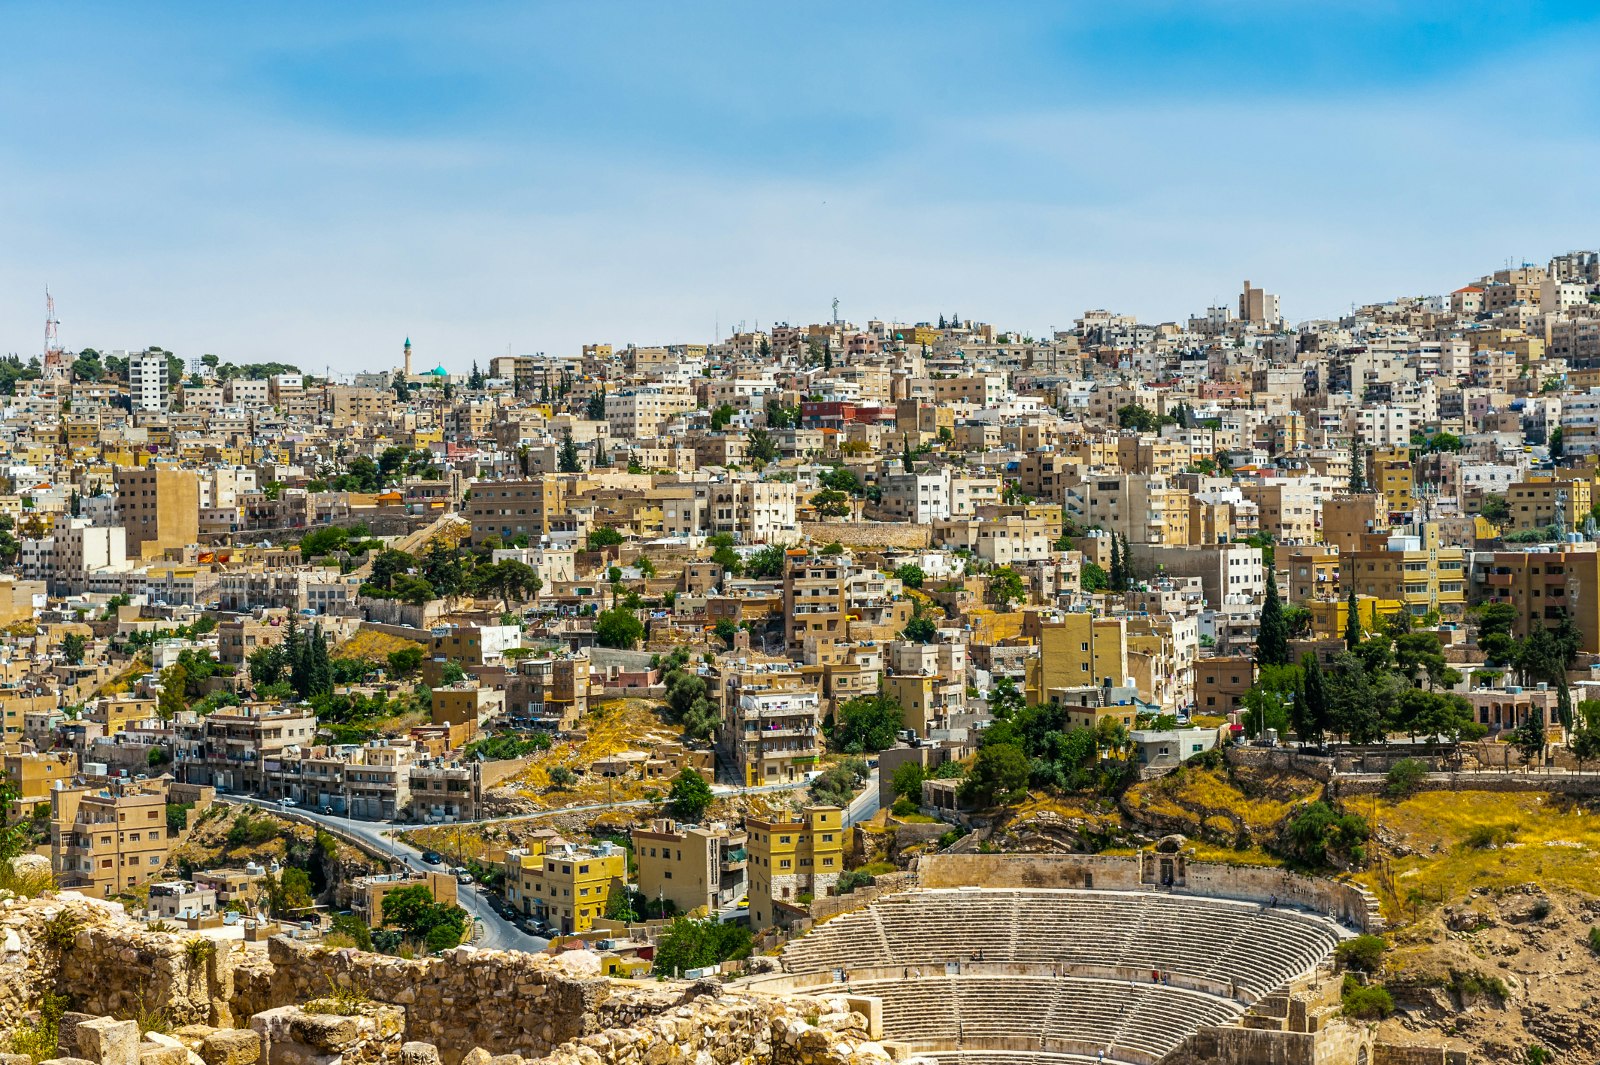 In front of the city that seems perched on a hillside is the Roman Theatre, with its semi-circular seats arching around its centre stage; Free things to do in Amman, Jordan